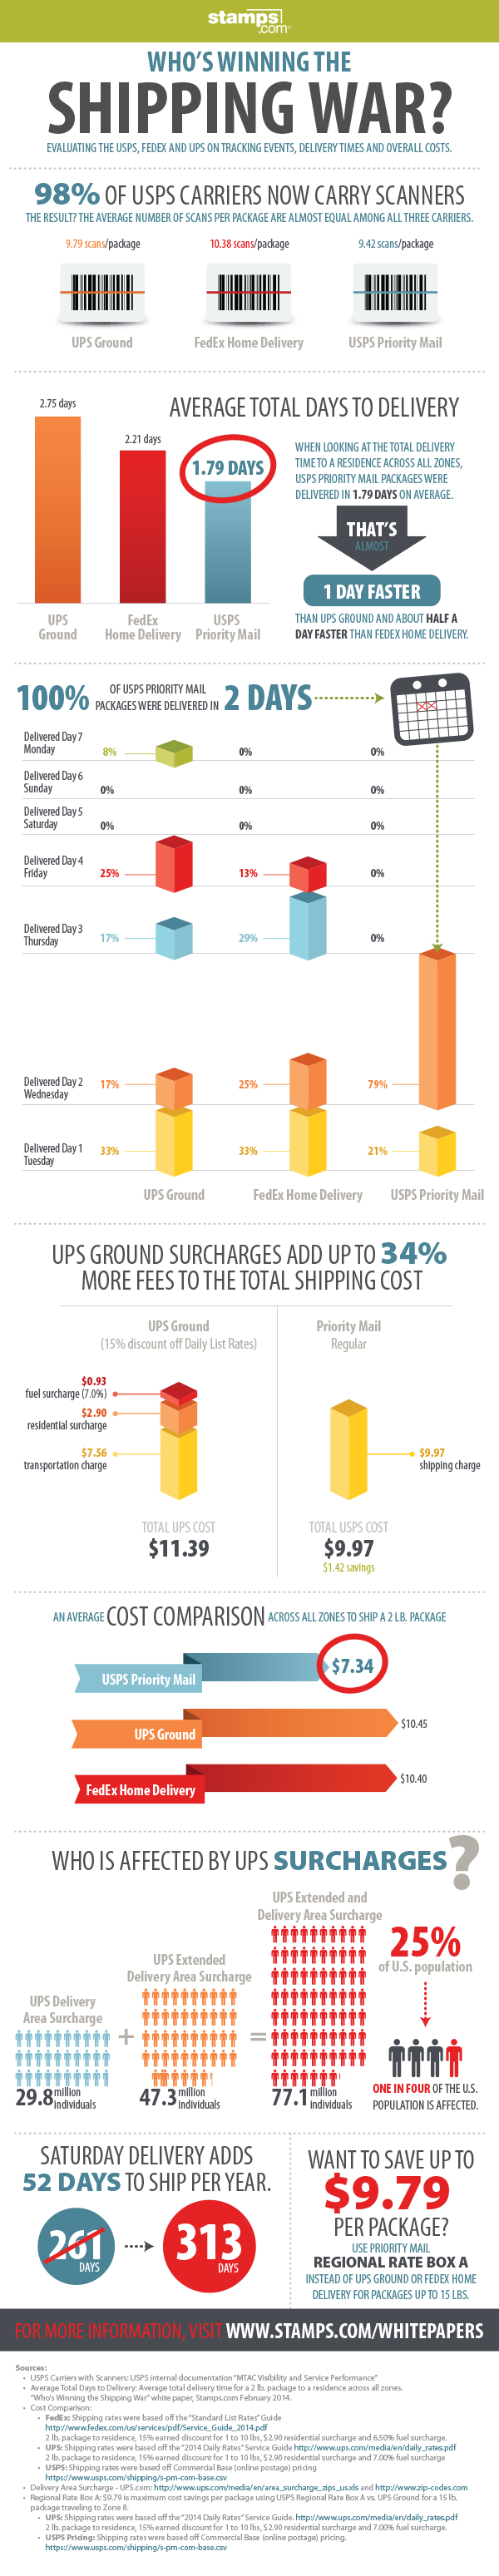 UPS vs. FedEx vs the USPS - Compare Shipping Carriers